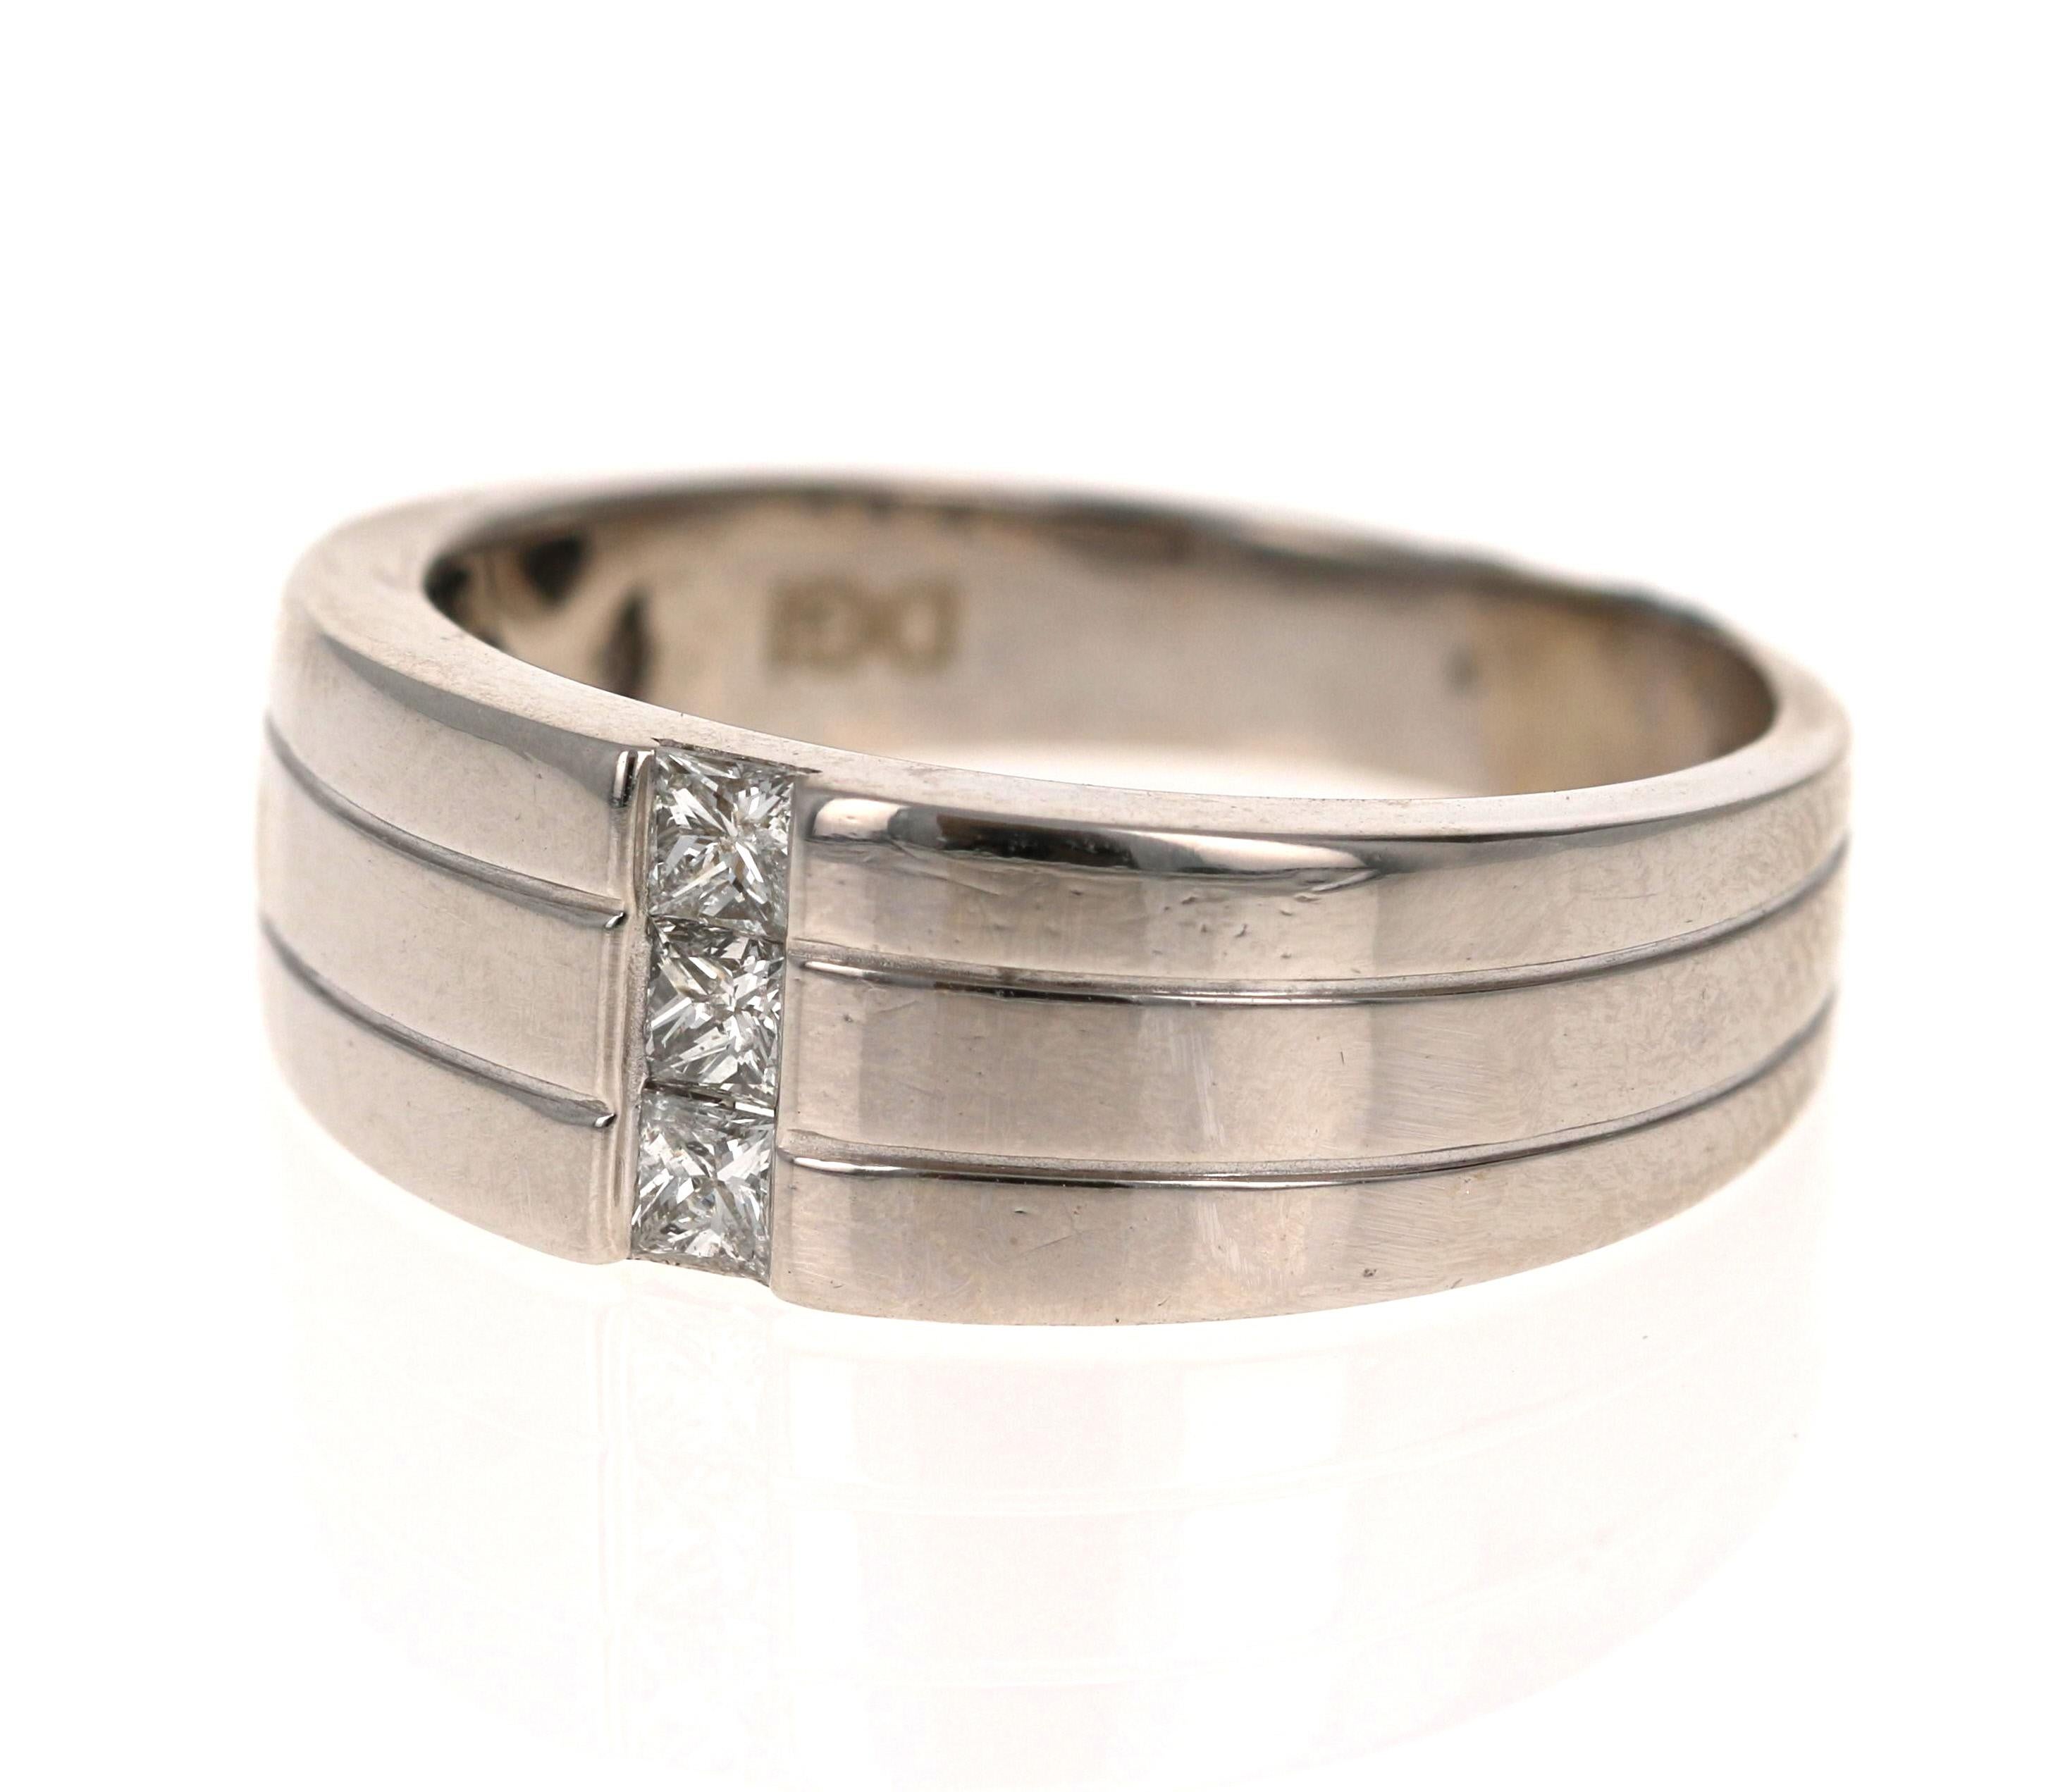 We have a Men's Collection of Fine Jewelry!  Beautiful, Bold, Masculine and Simple Men's Wedding Rings/Bands. 

This Men's Band has 3 Princess Cut Diamonds that weigh 0.30 Carats.  

It is crafted in 14 Karat White Gold and weighs approximately 7.0